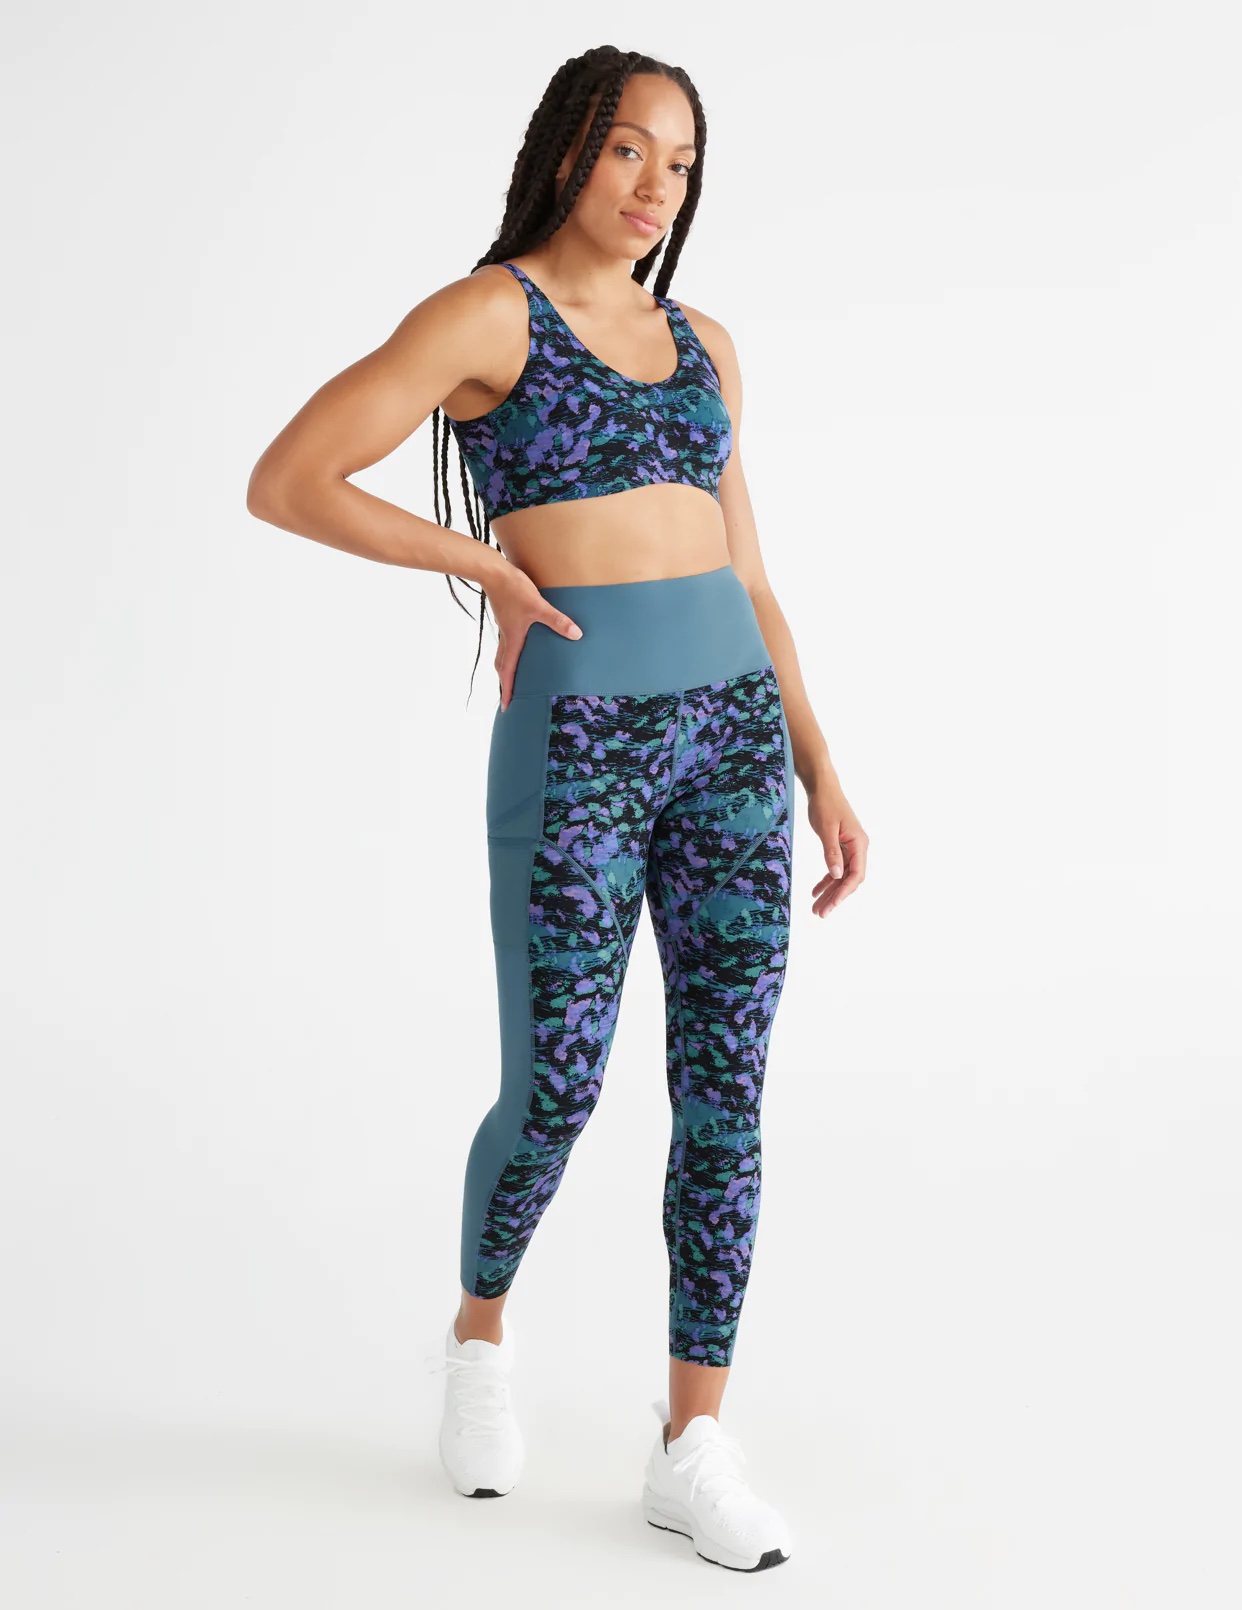 Knix LeakStrong Leakproof Activewear Review and Try On